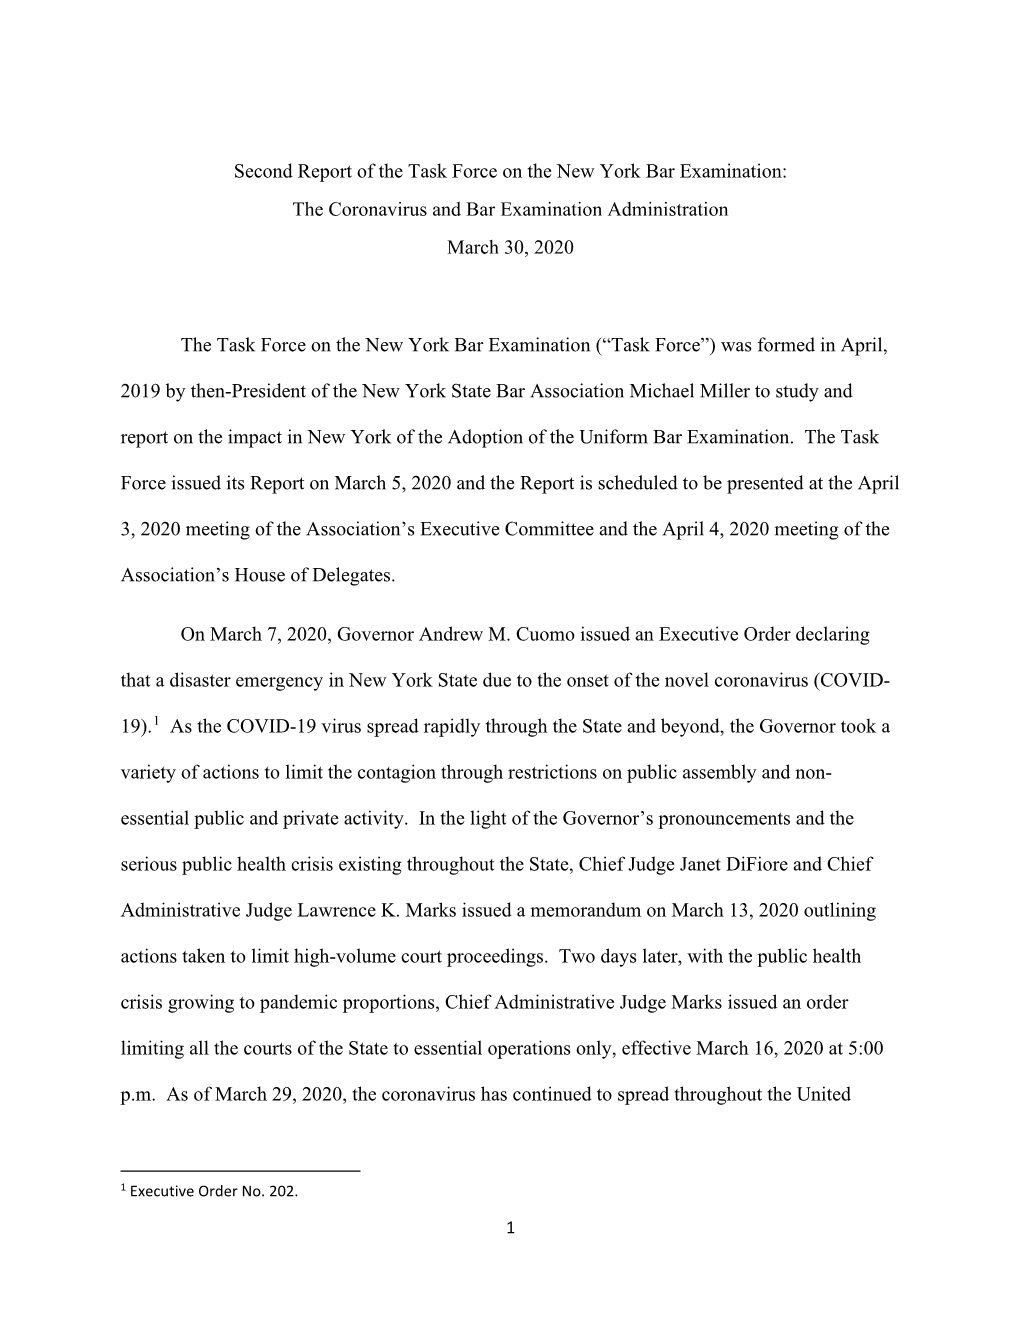 Second Report of the Task Force on the New York Bar Examination: the Coronavirus and Bar Examination Administration March 30, 2020